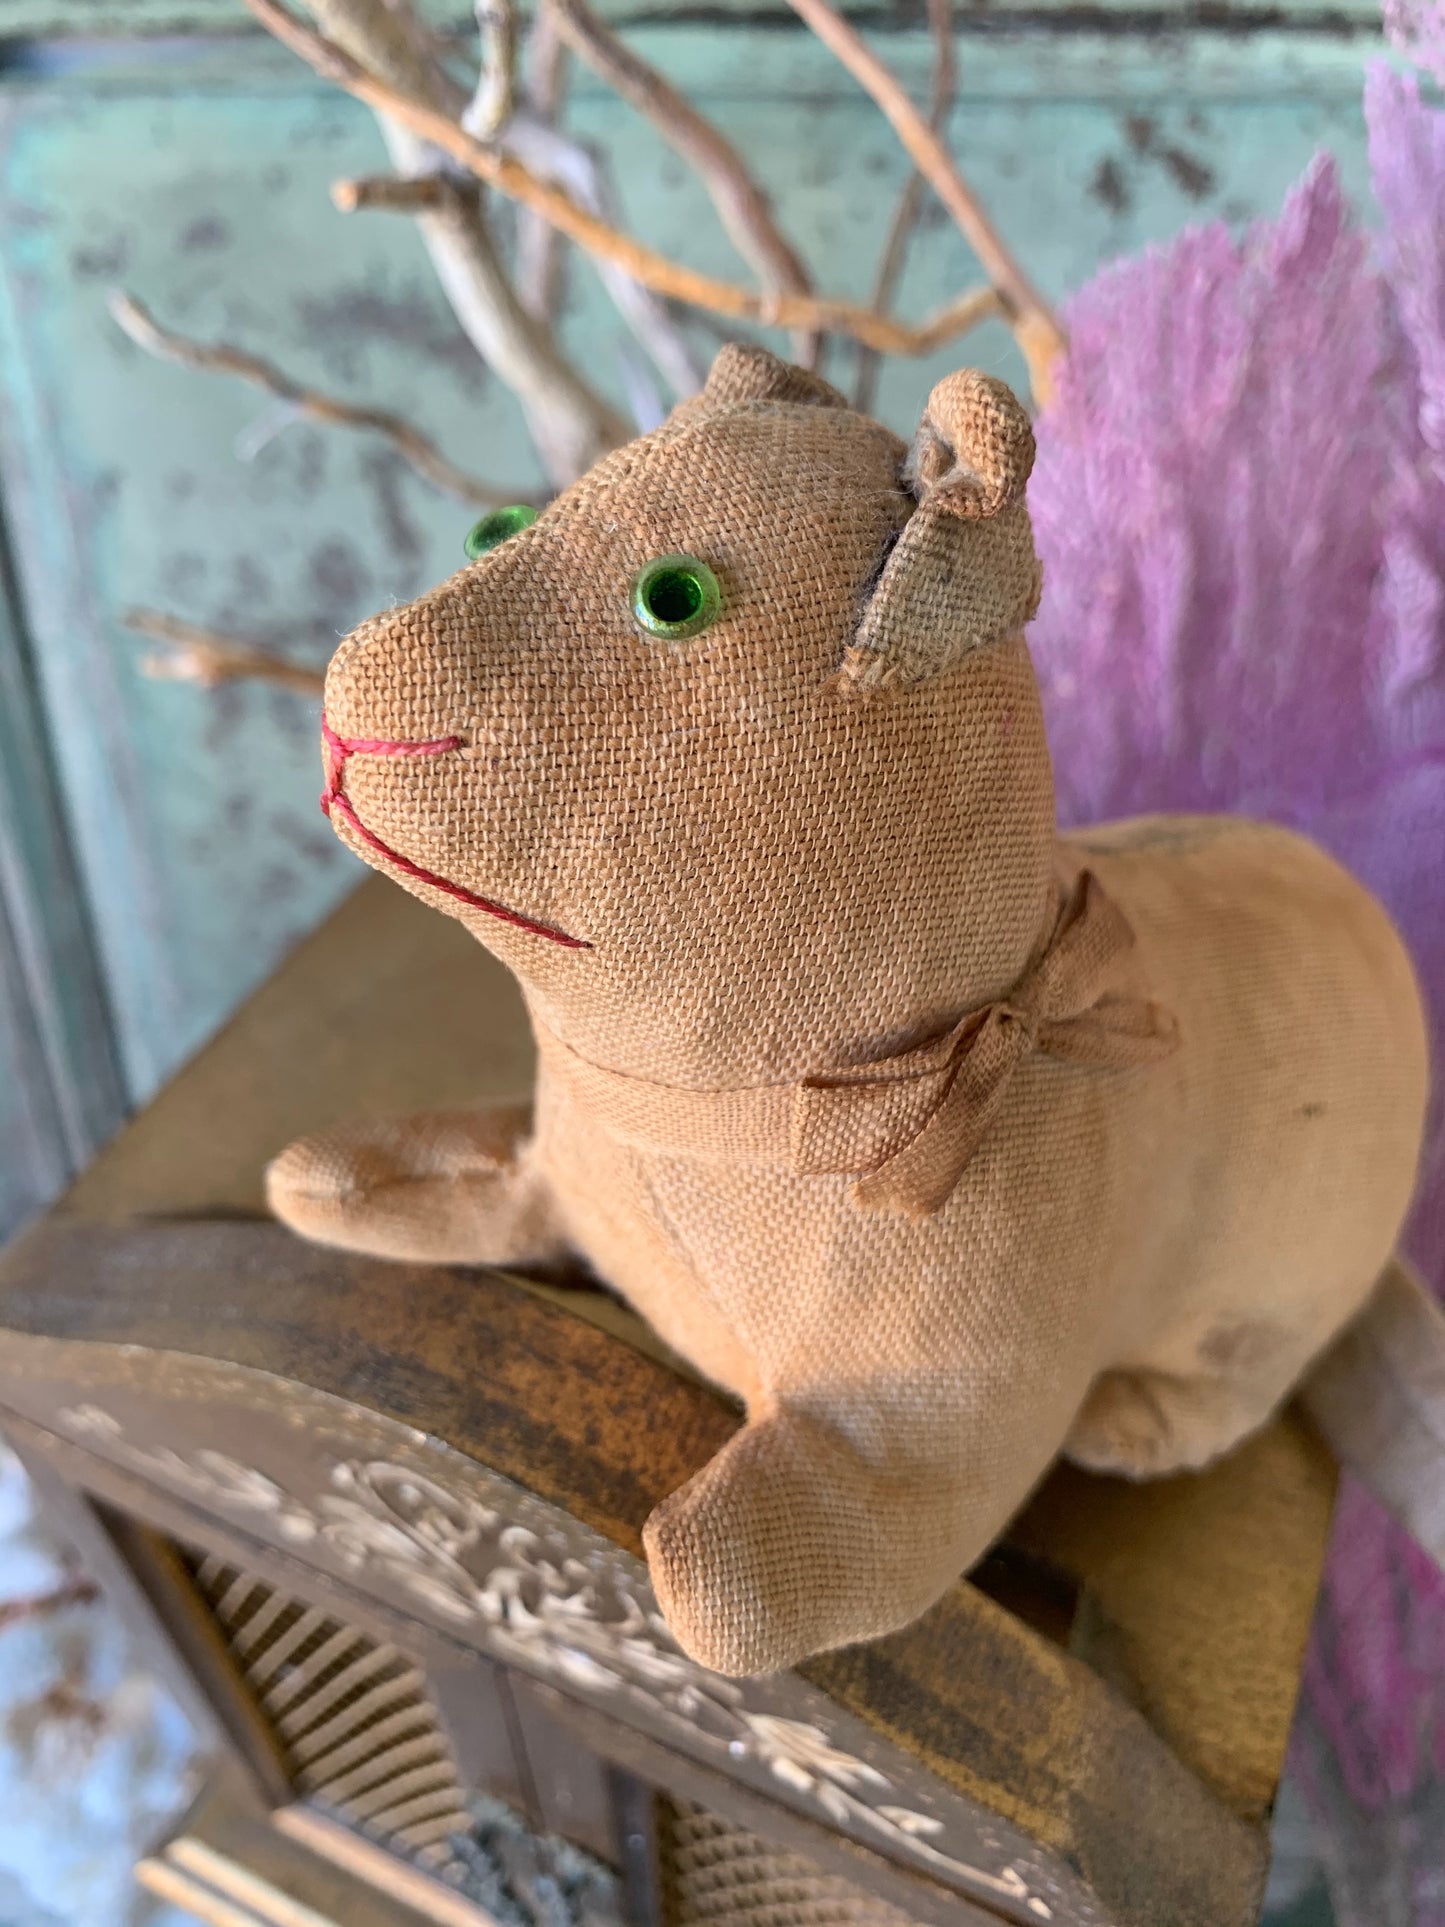 Vintage stuffed toy kitty with glass eyes